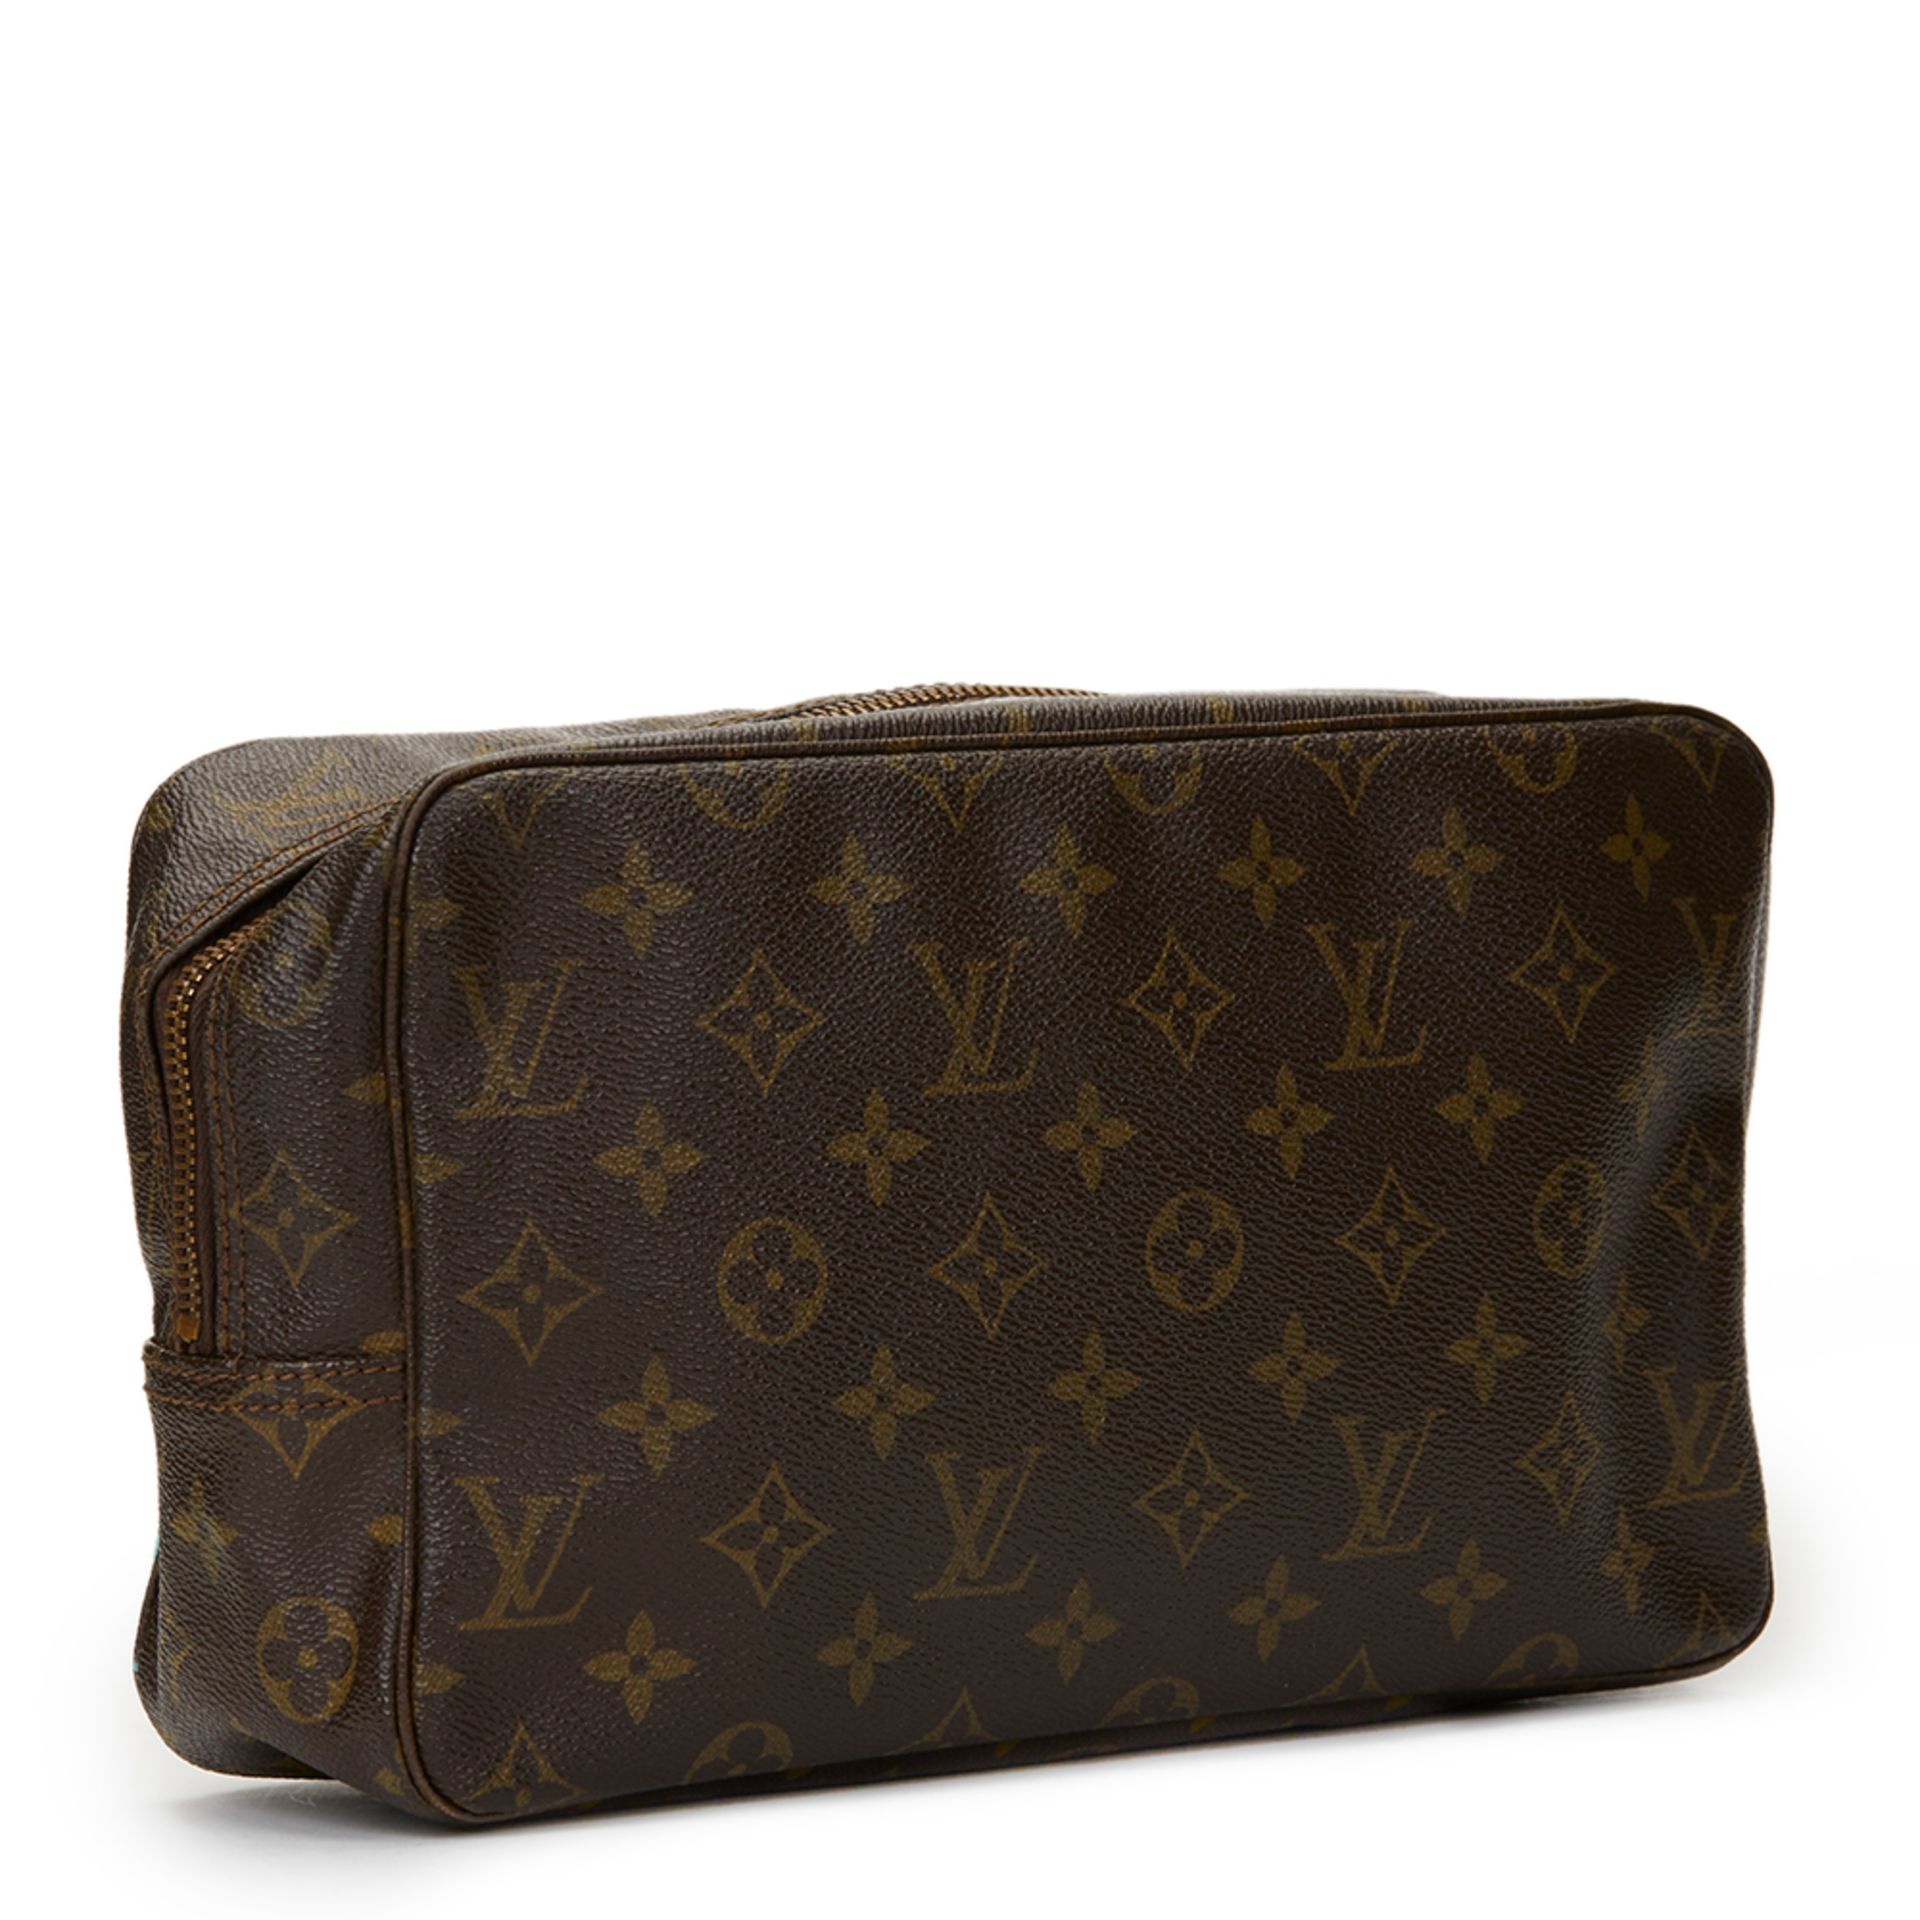 Louis Vuitton Hand-painted 'Get This Money' X Year Zero London Toiletry Pouch - Image 4 of 9